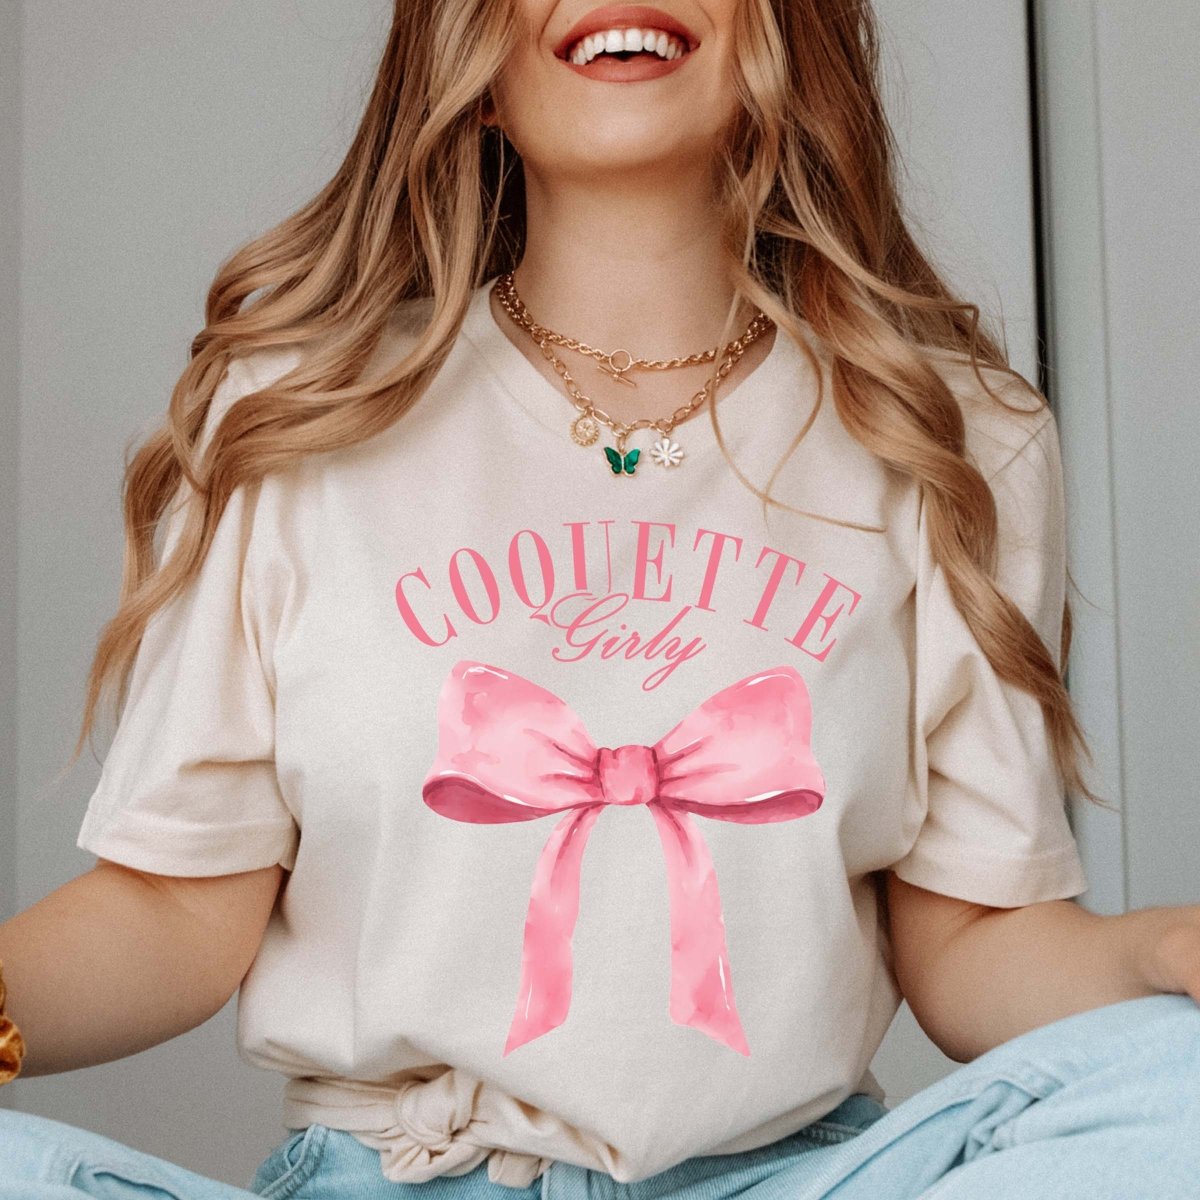 Coquette Girly Tee - Limeberry Designs